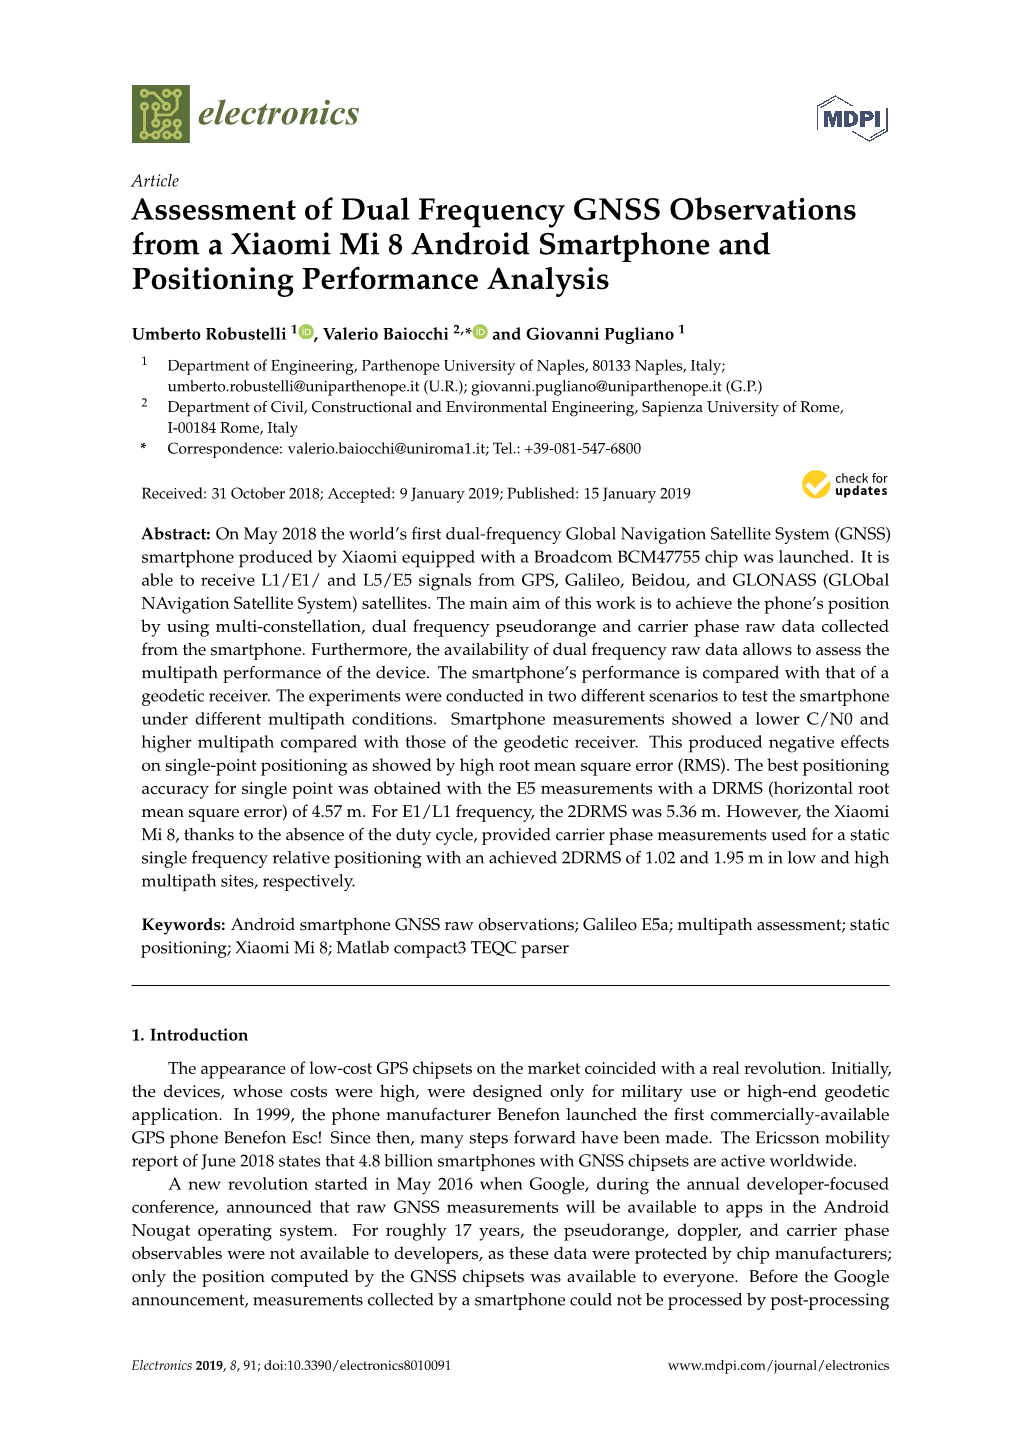 Assessment of Dual Frequency GNSS Observations from a Xiaomi Mi 8 Android Smartphone and Positioning Performance Analysis